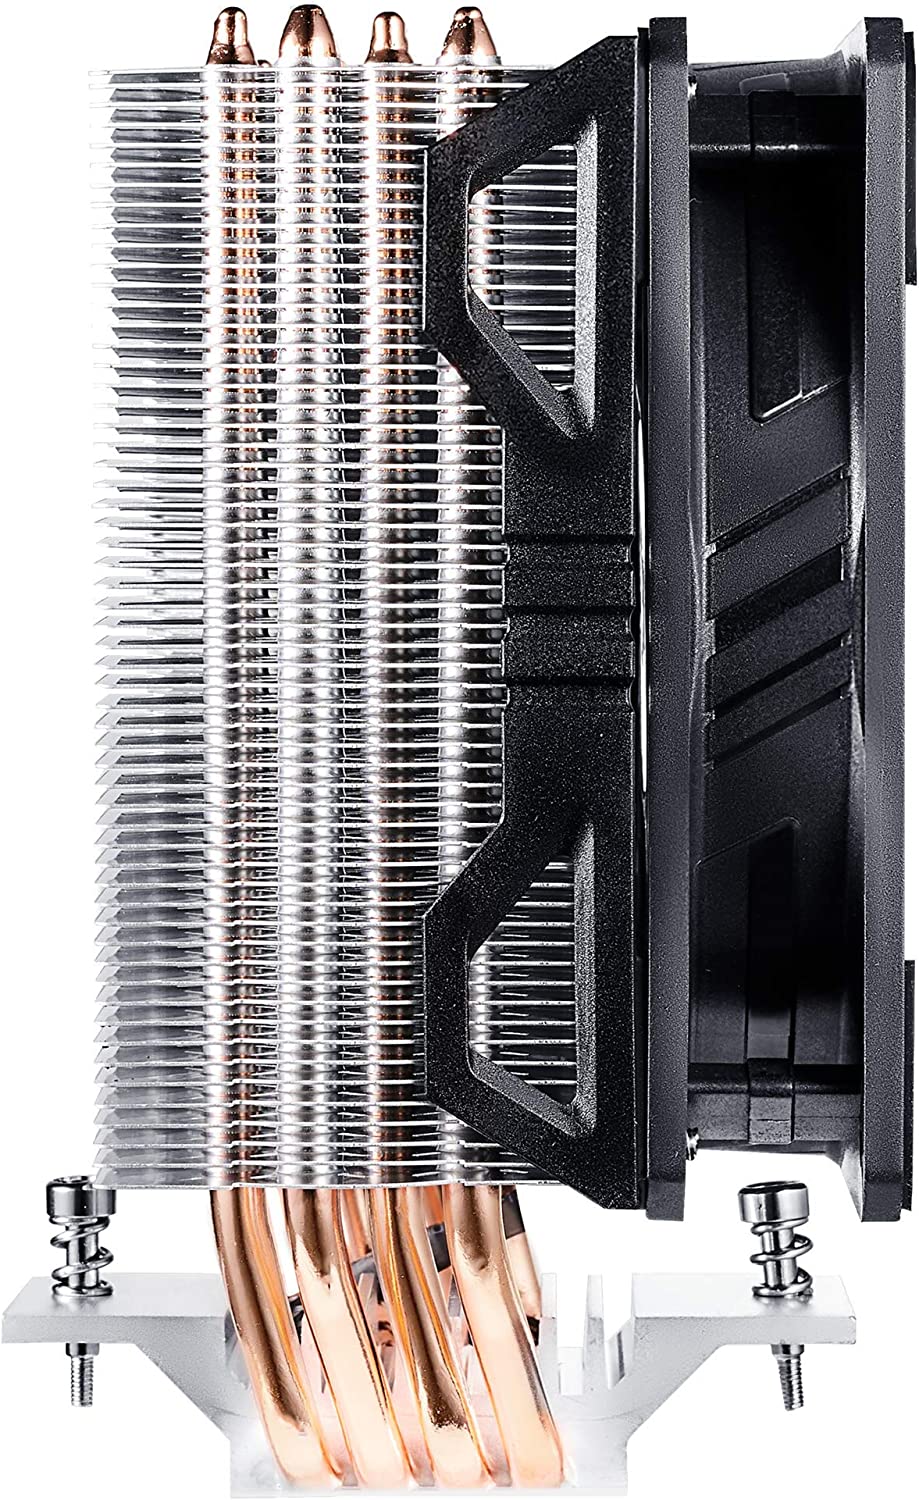 Cooler Master Hyper 212 EVO V2 CPU Air Cooler with SickleFlow 120, PWM Fan, Direct Contact Technology, 4 Copper Heat Pipes for AMD Ryzen/Intel LGA1700/1200/1151, RR-2V2E-18PK-R2